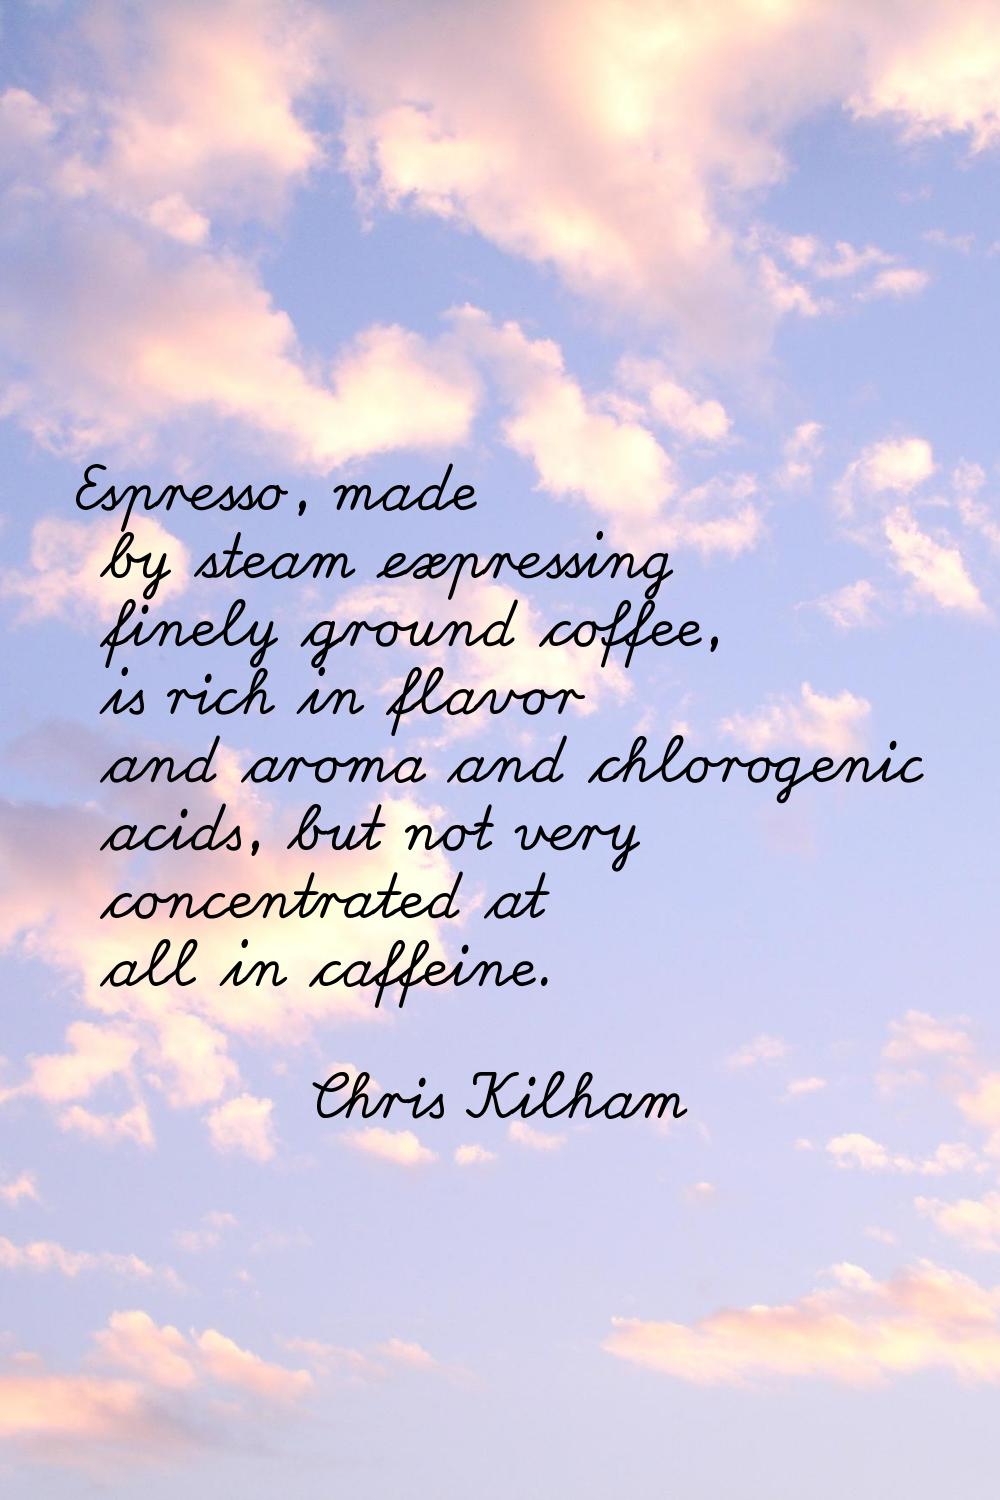 Espresso, made by steam expressing finely ground coffee, is rich in flavor and aroma and chlorogeni